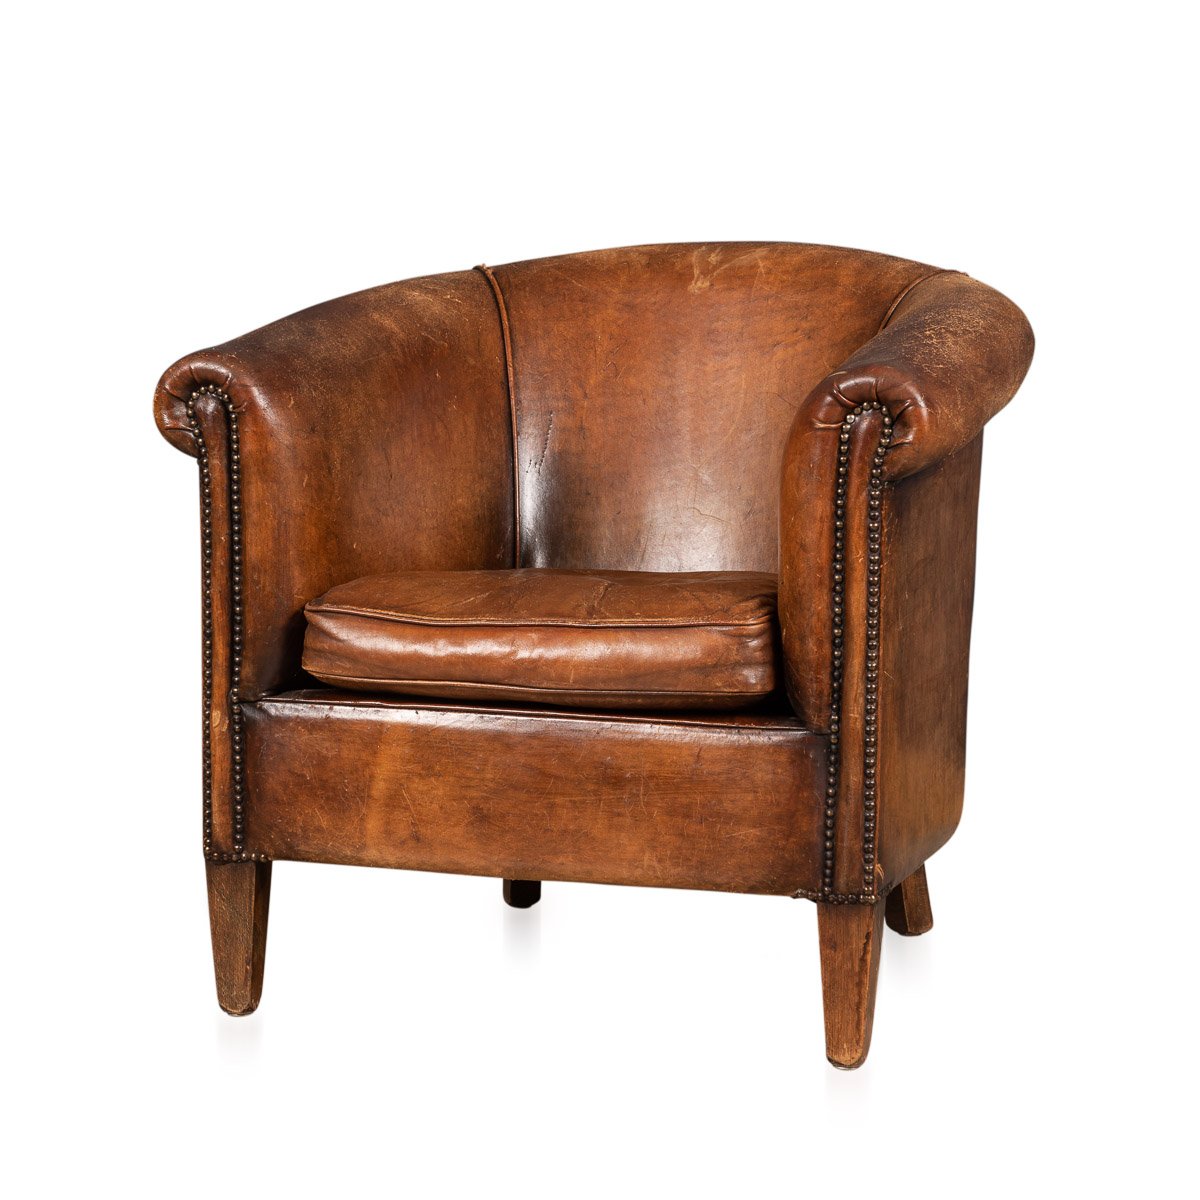 20th Century Dutch Sheepskin Leather Tub Chair For Sale At Pamono